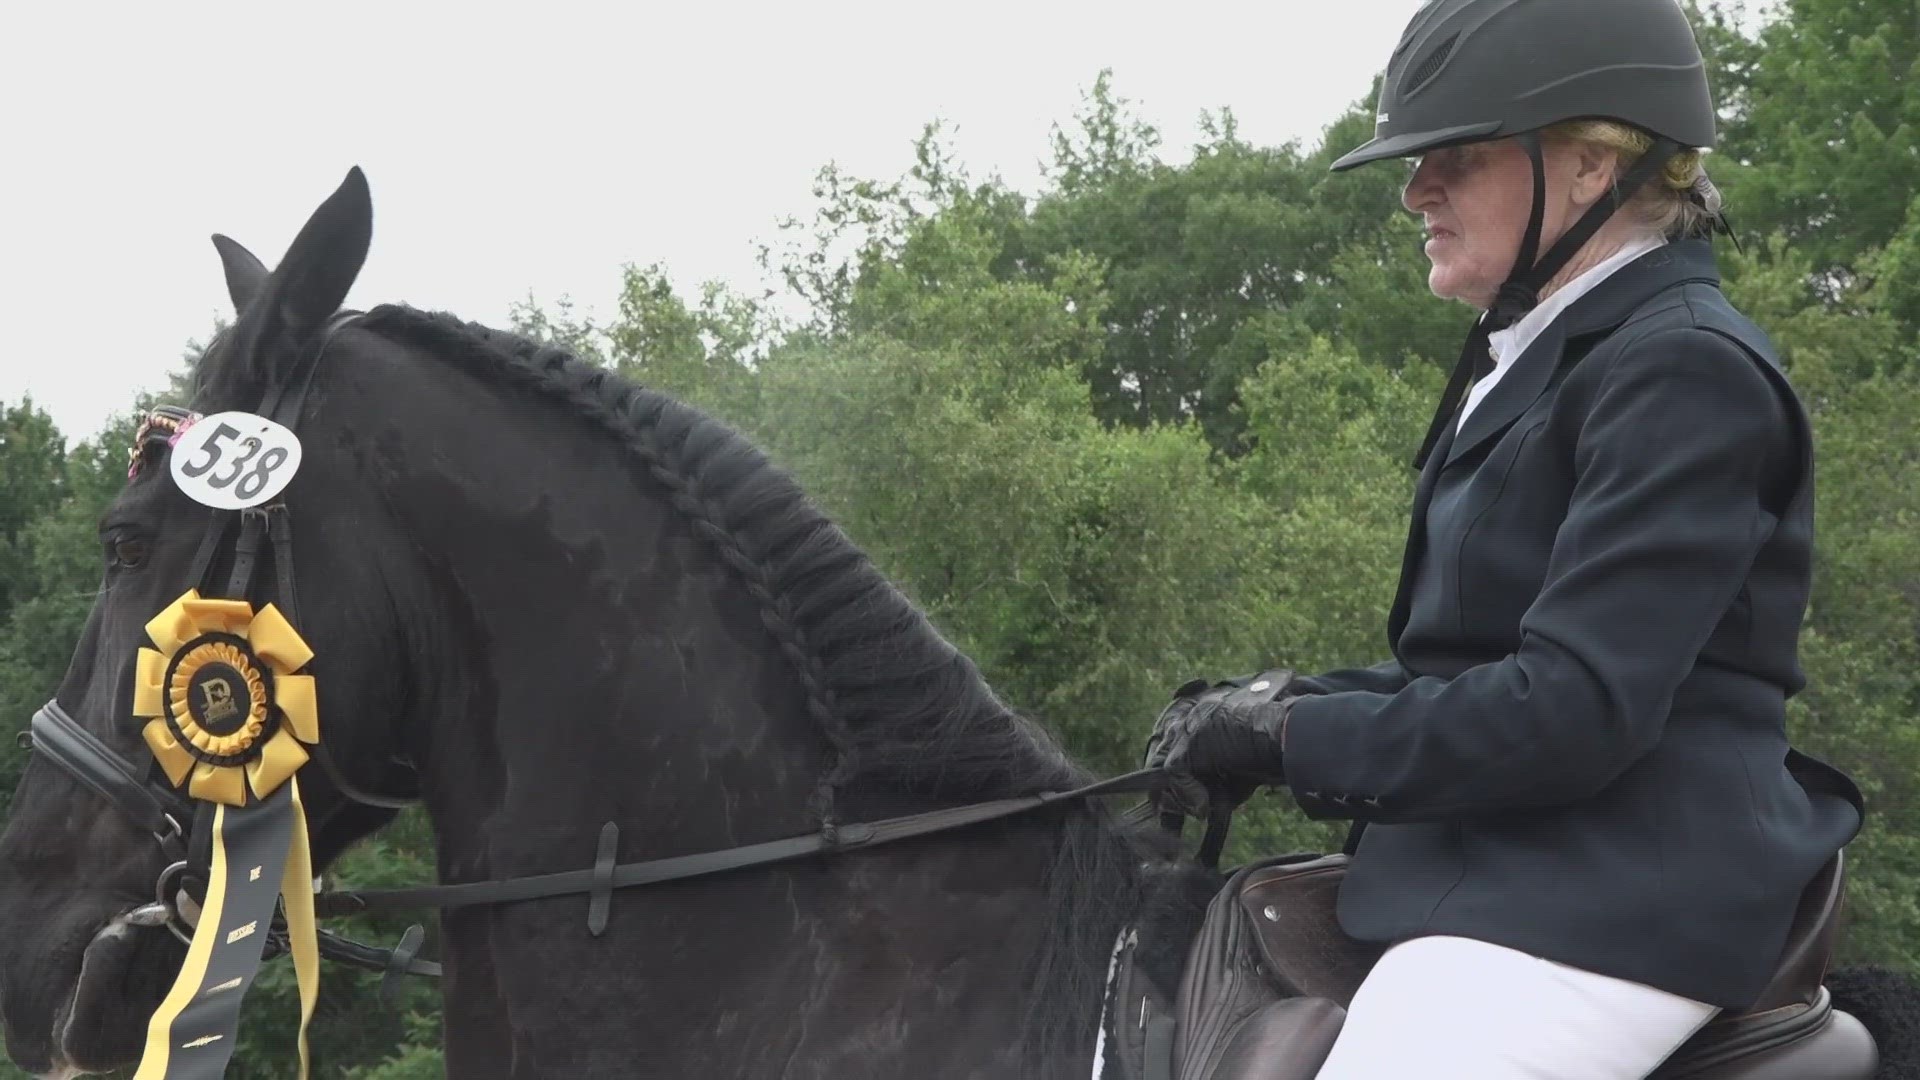 Jean Murphy-Ashton suffered serious injuries when a horse fell on her two years ago. This weekend, she hoped back on the saddle